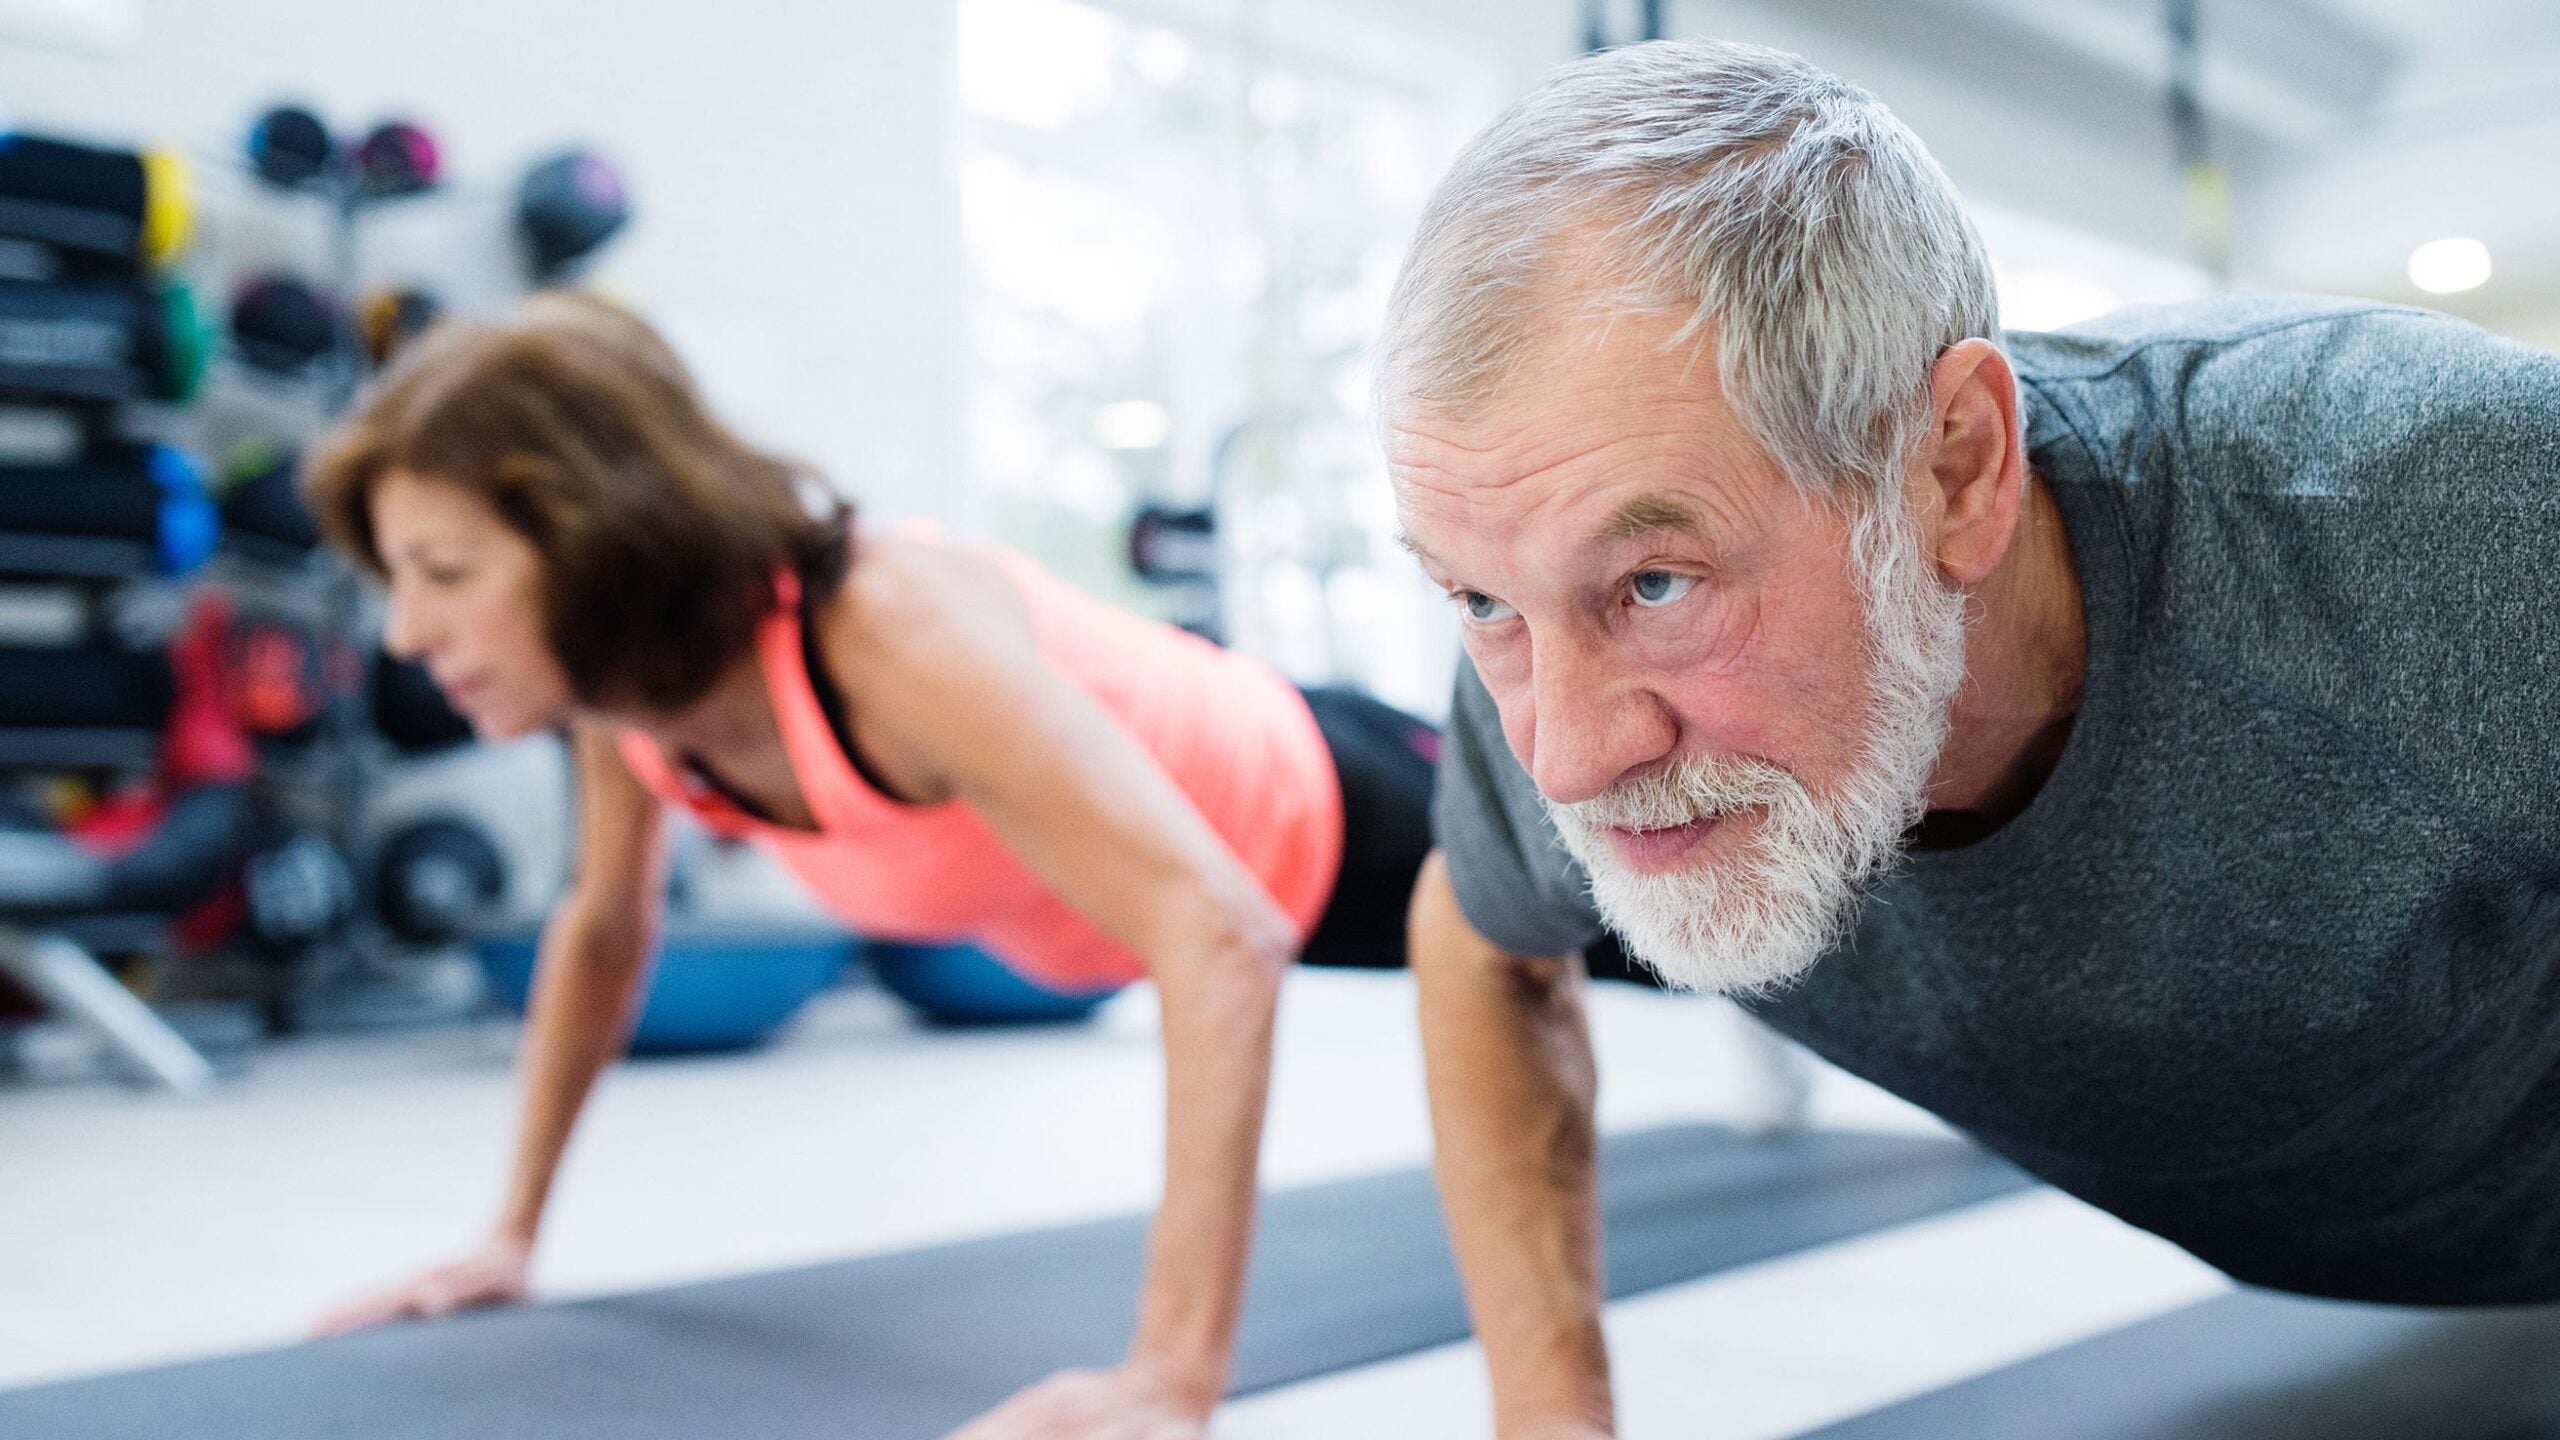 Study On Aging Athletes: It's Never Too Late To Begin Strength